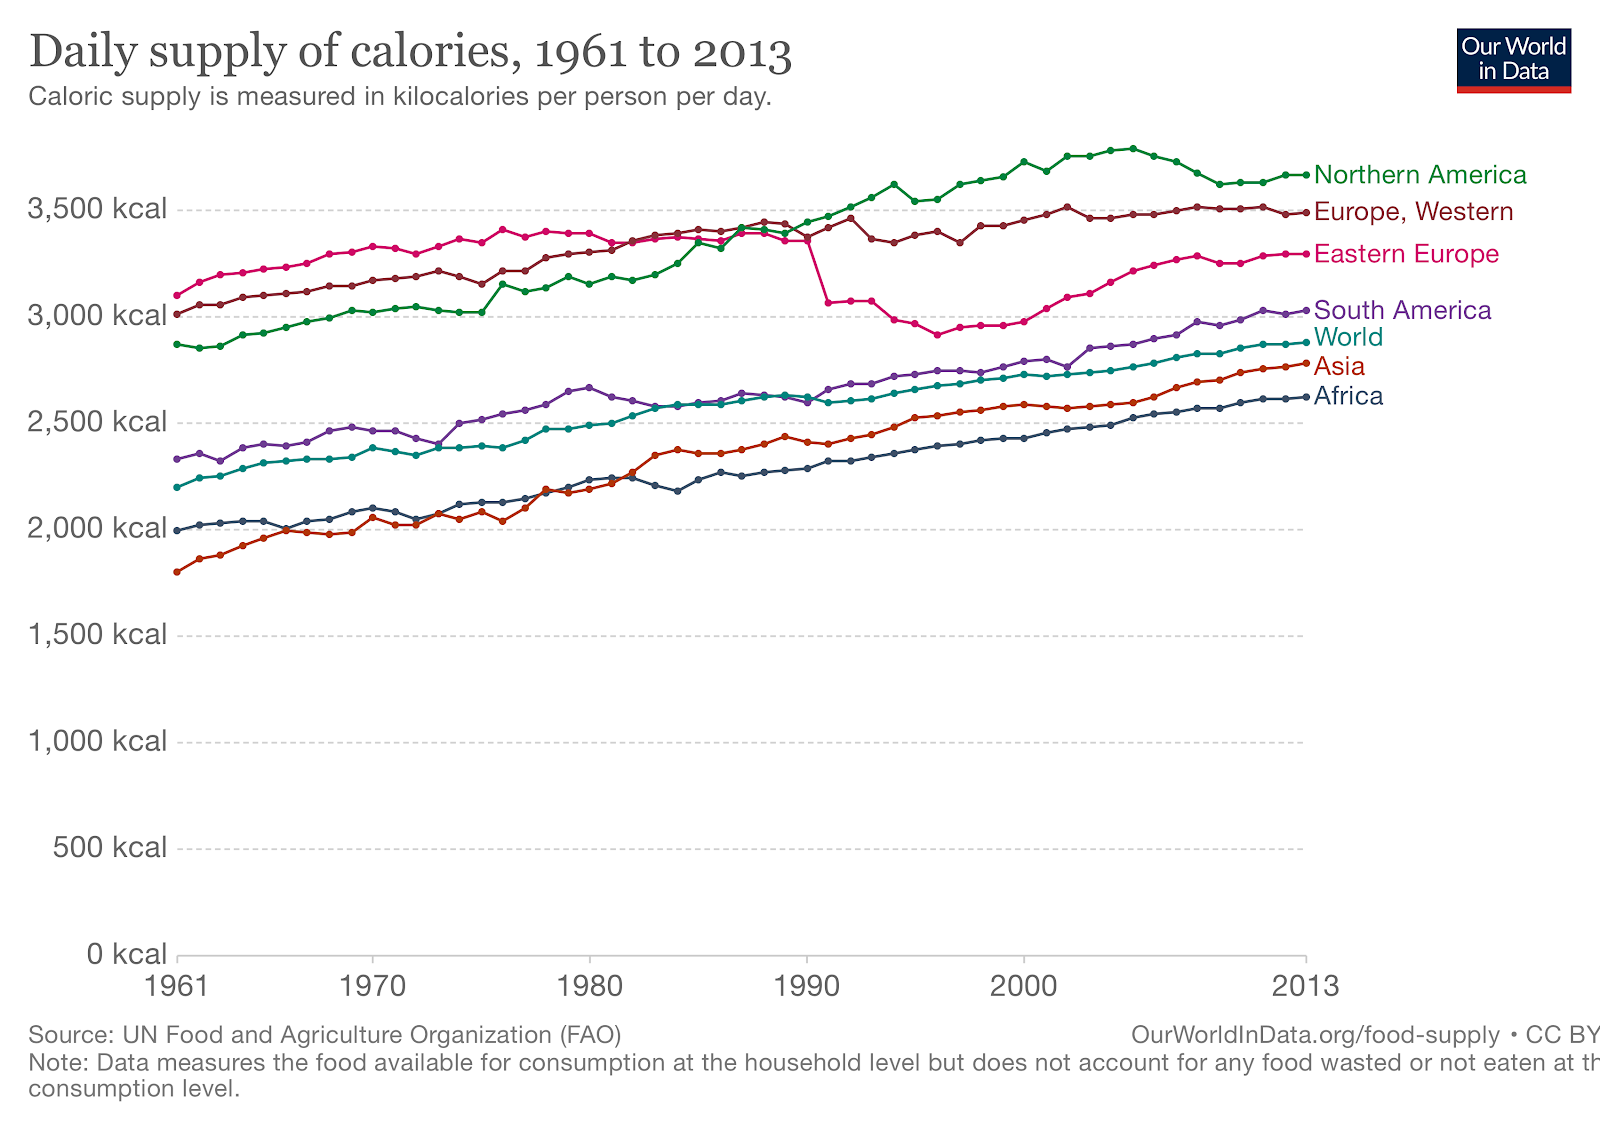 graph of the increase in daily supply of calories per person by global region, 1961 to 2013